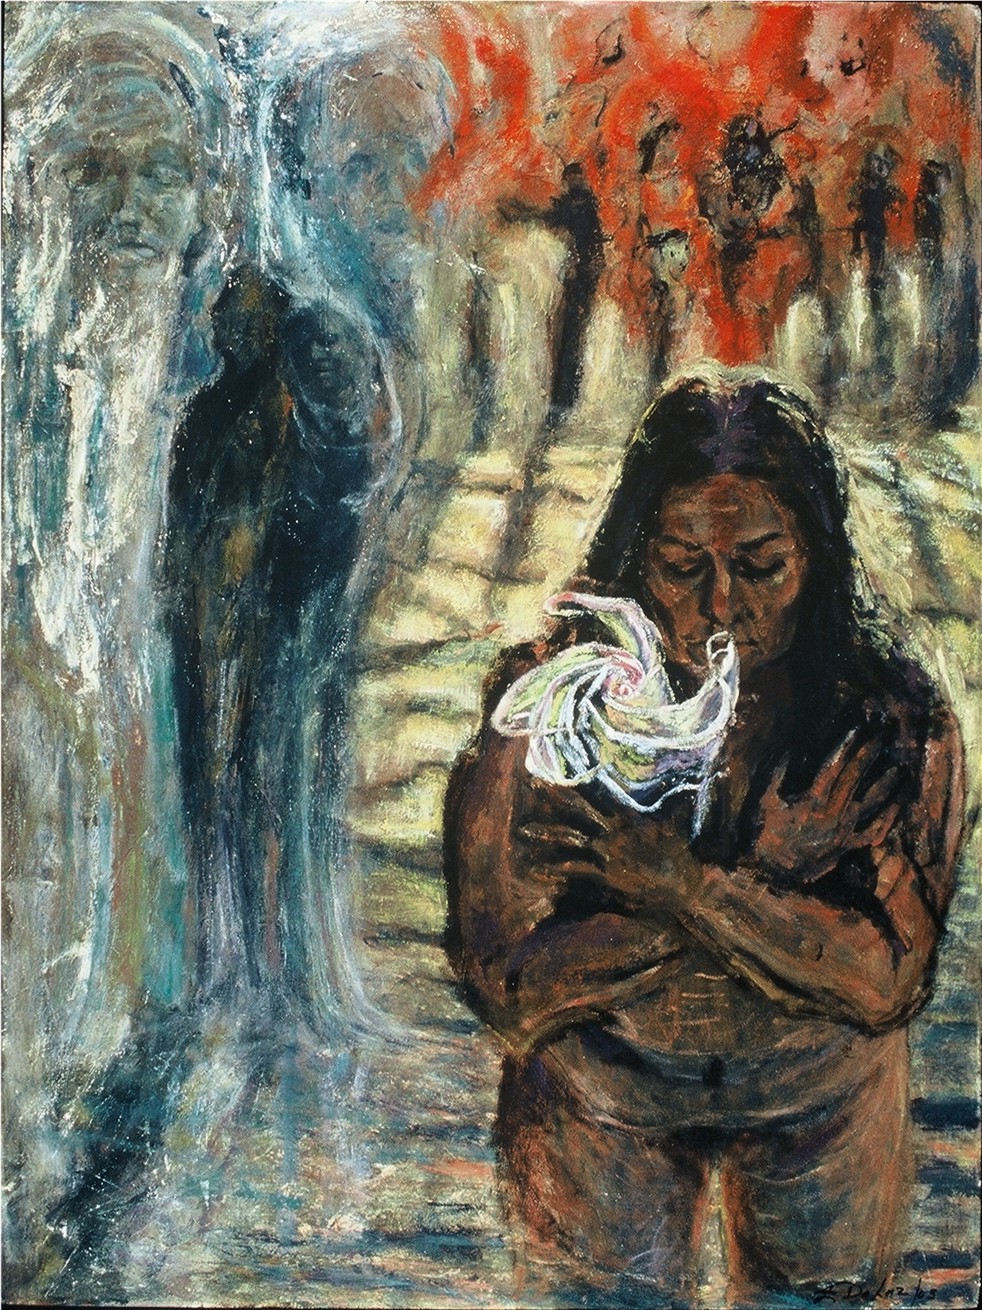 Baptism-Oil on canvas-40h x 30w in